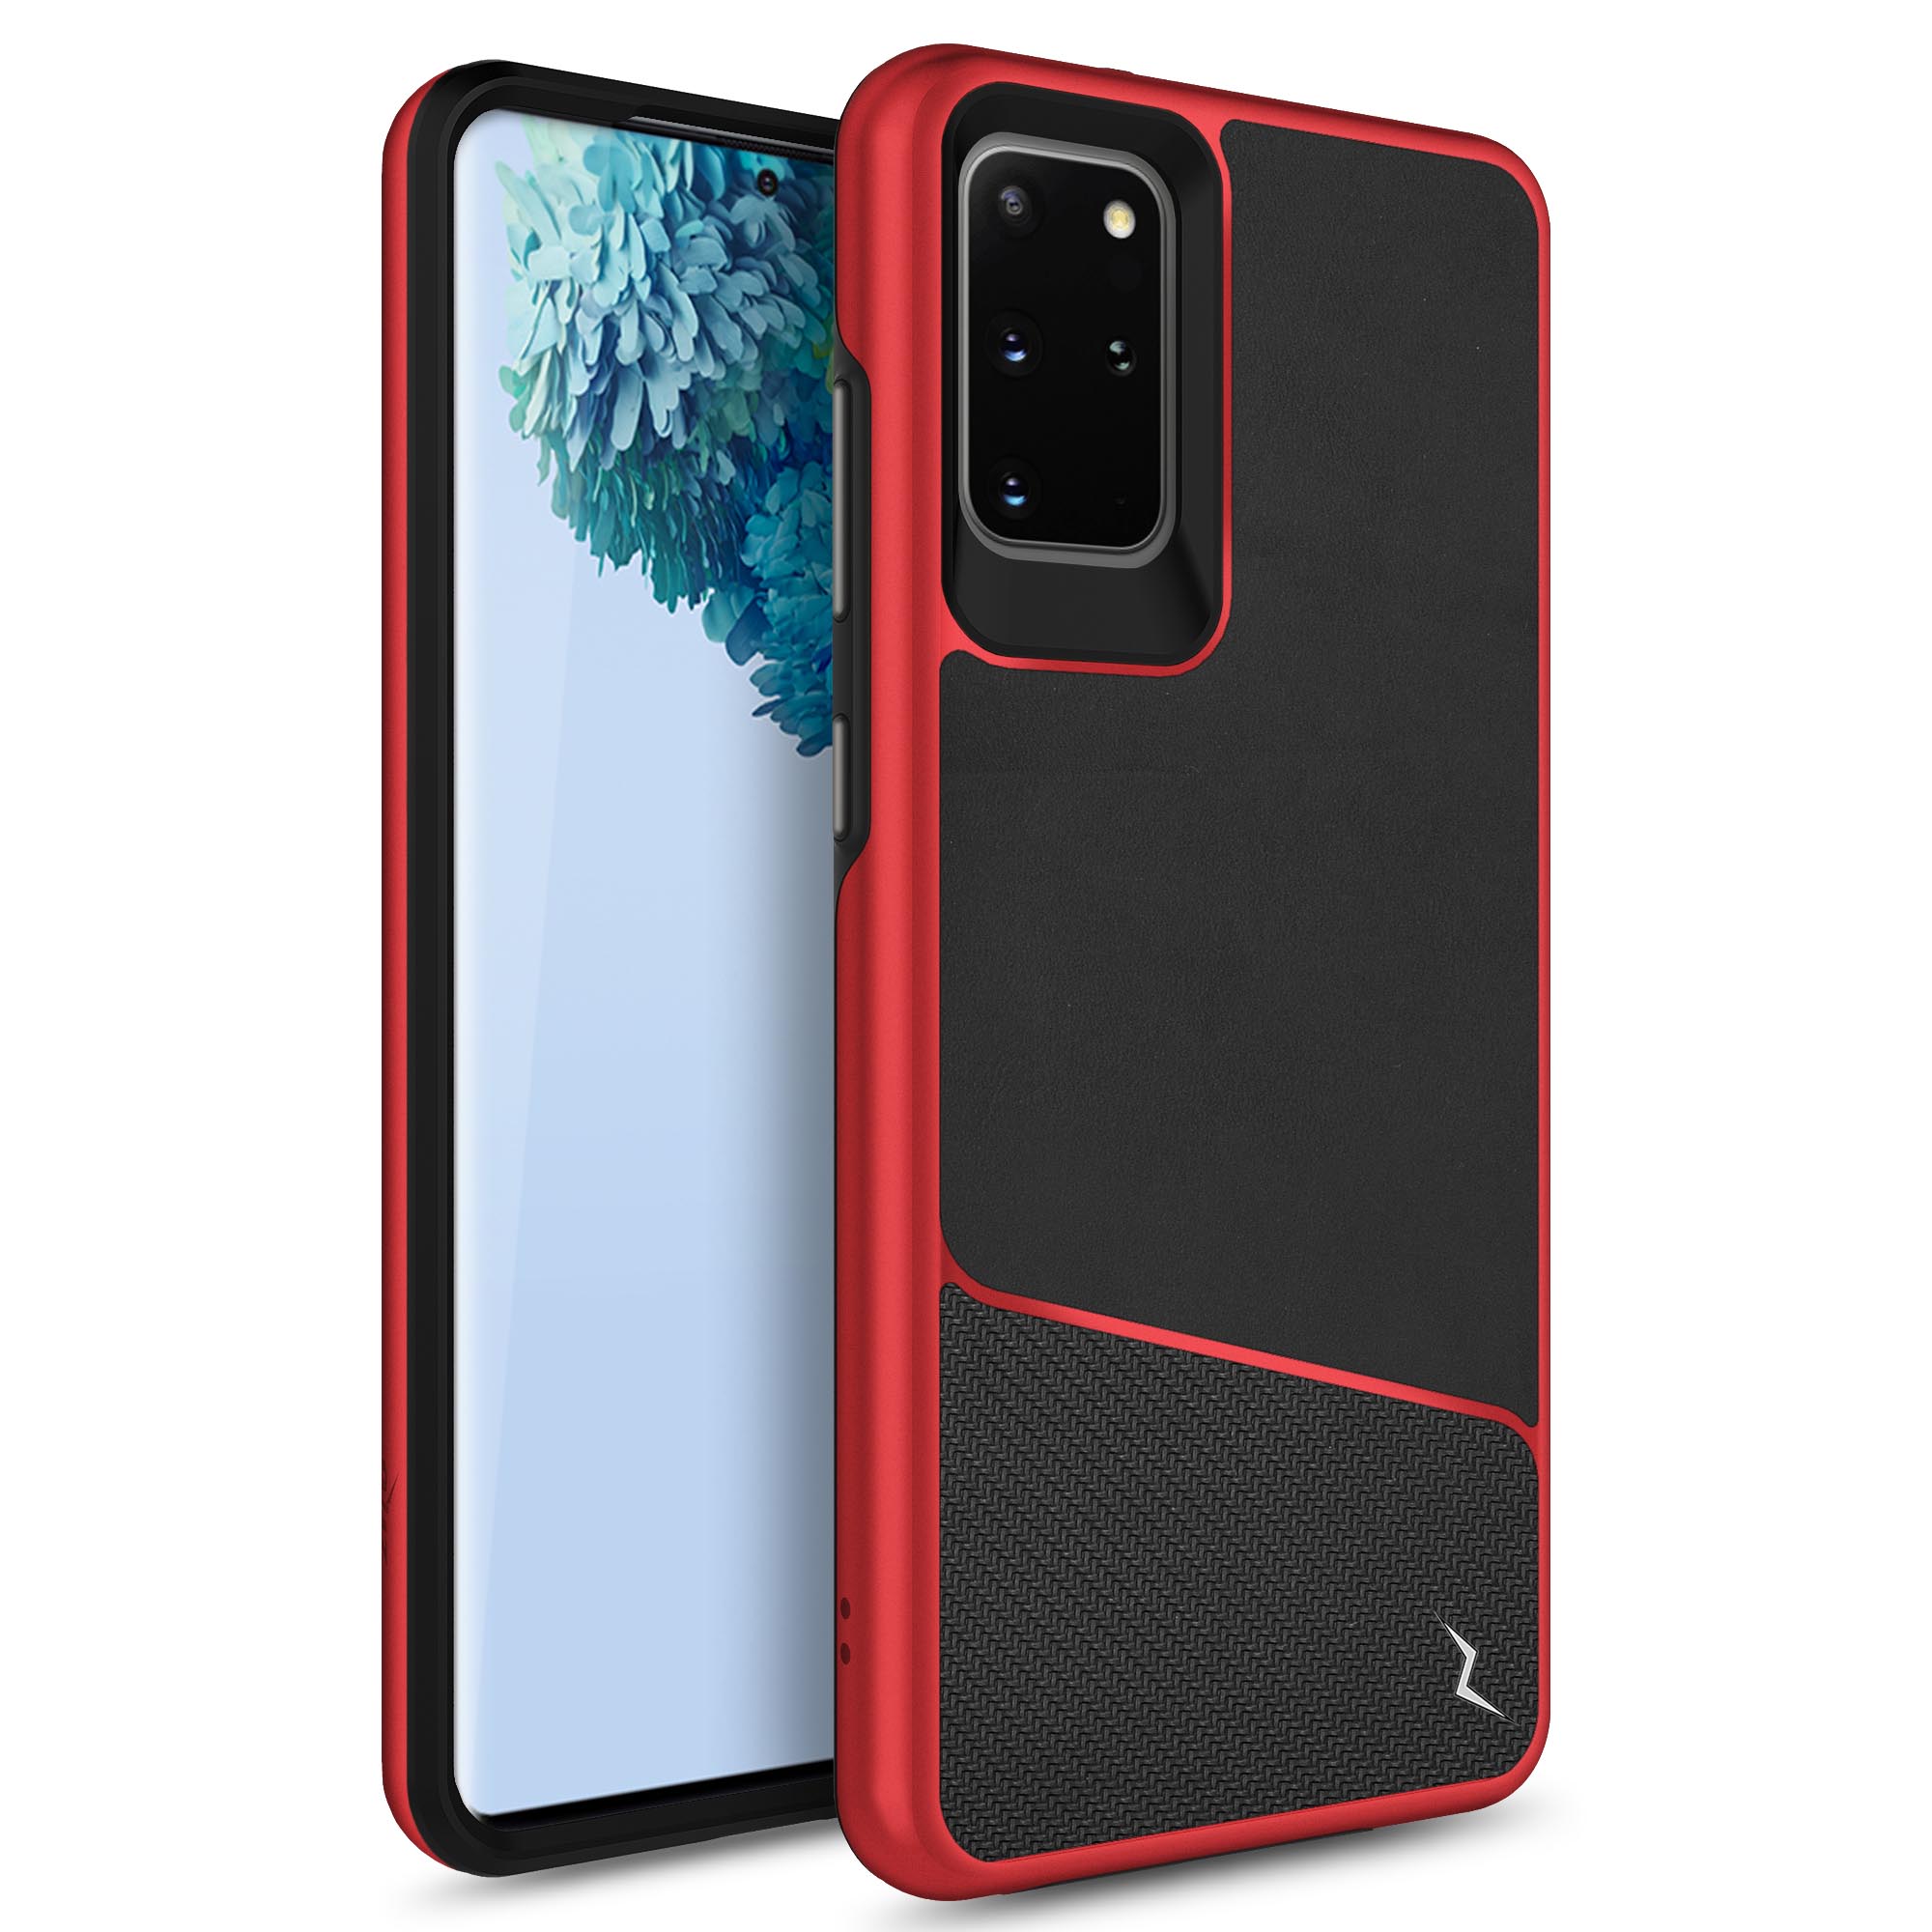 ZIZO DIVISION SERIES GALAXY S20+ CASE - BLACK & RED (10182)